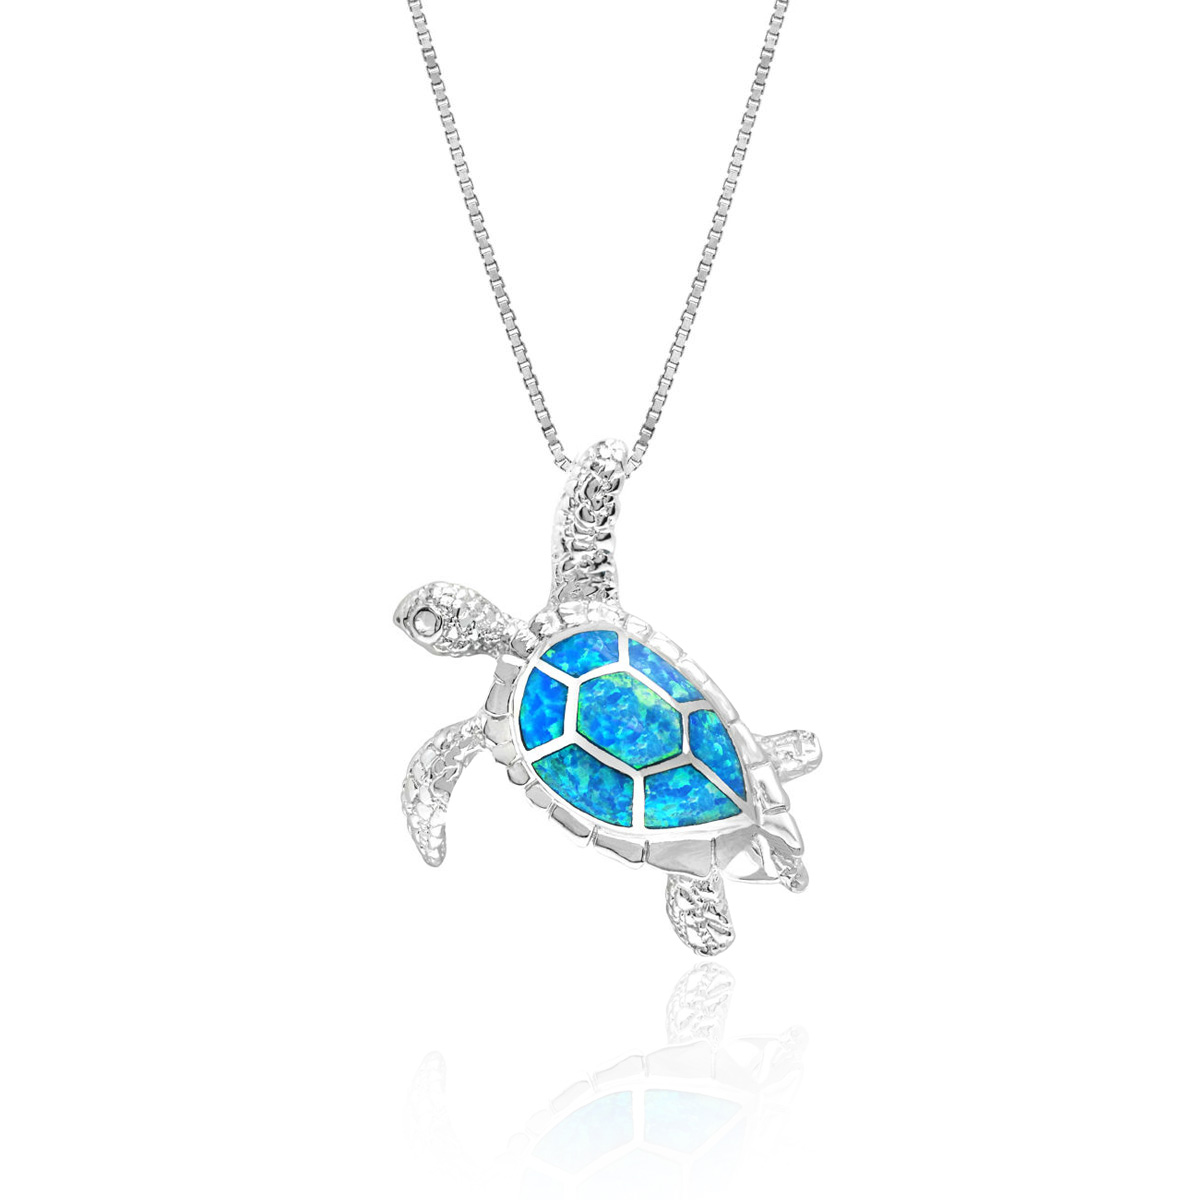 SURANO DESIGN JEWELRY Sterling Silver Necklace w/Blue Opal Crab Pendant